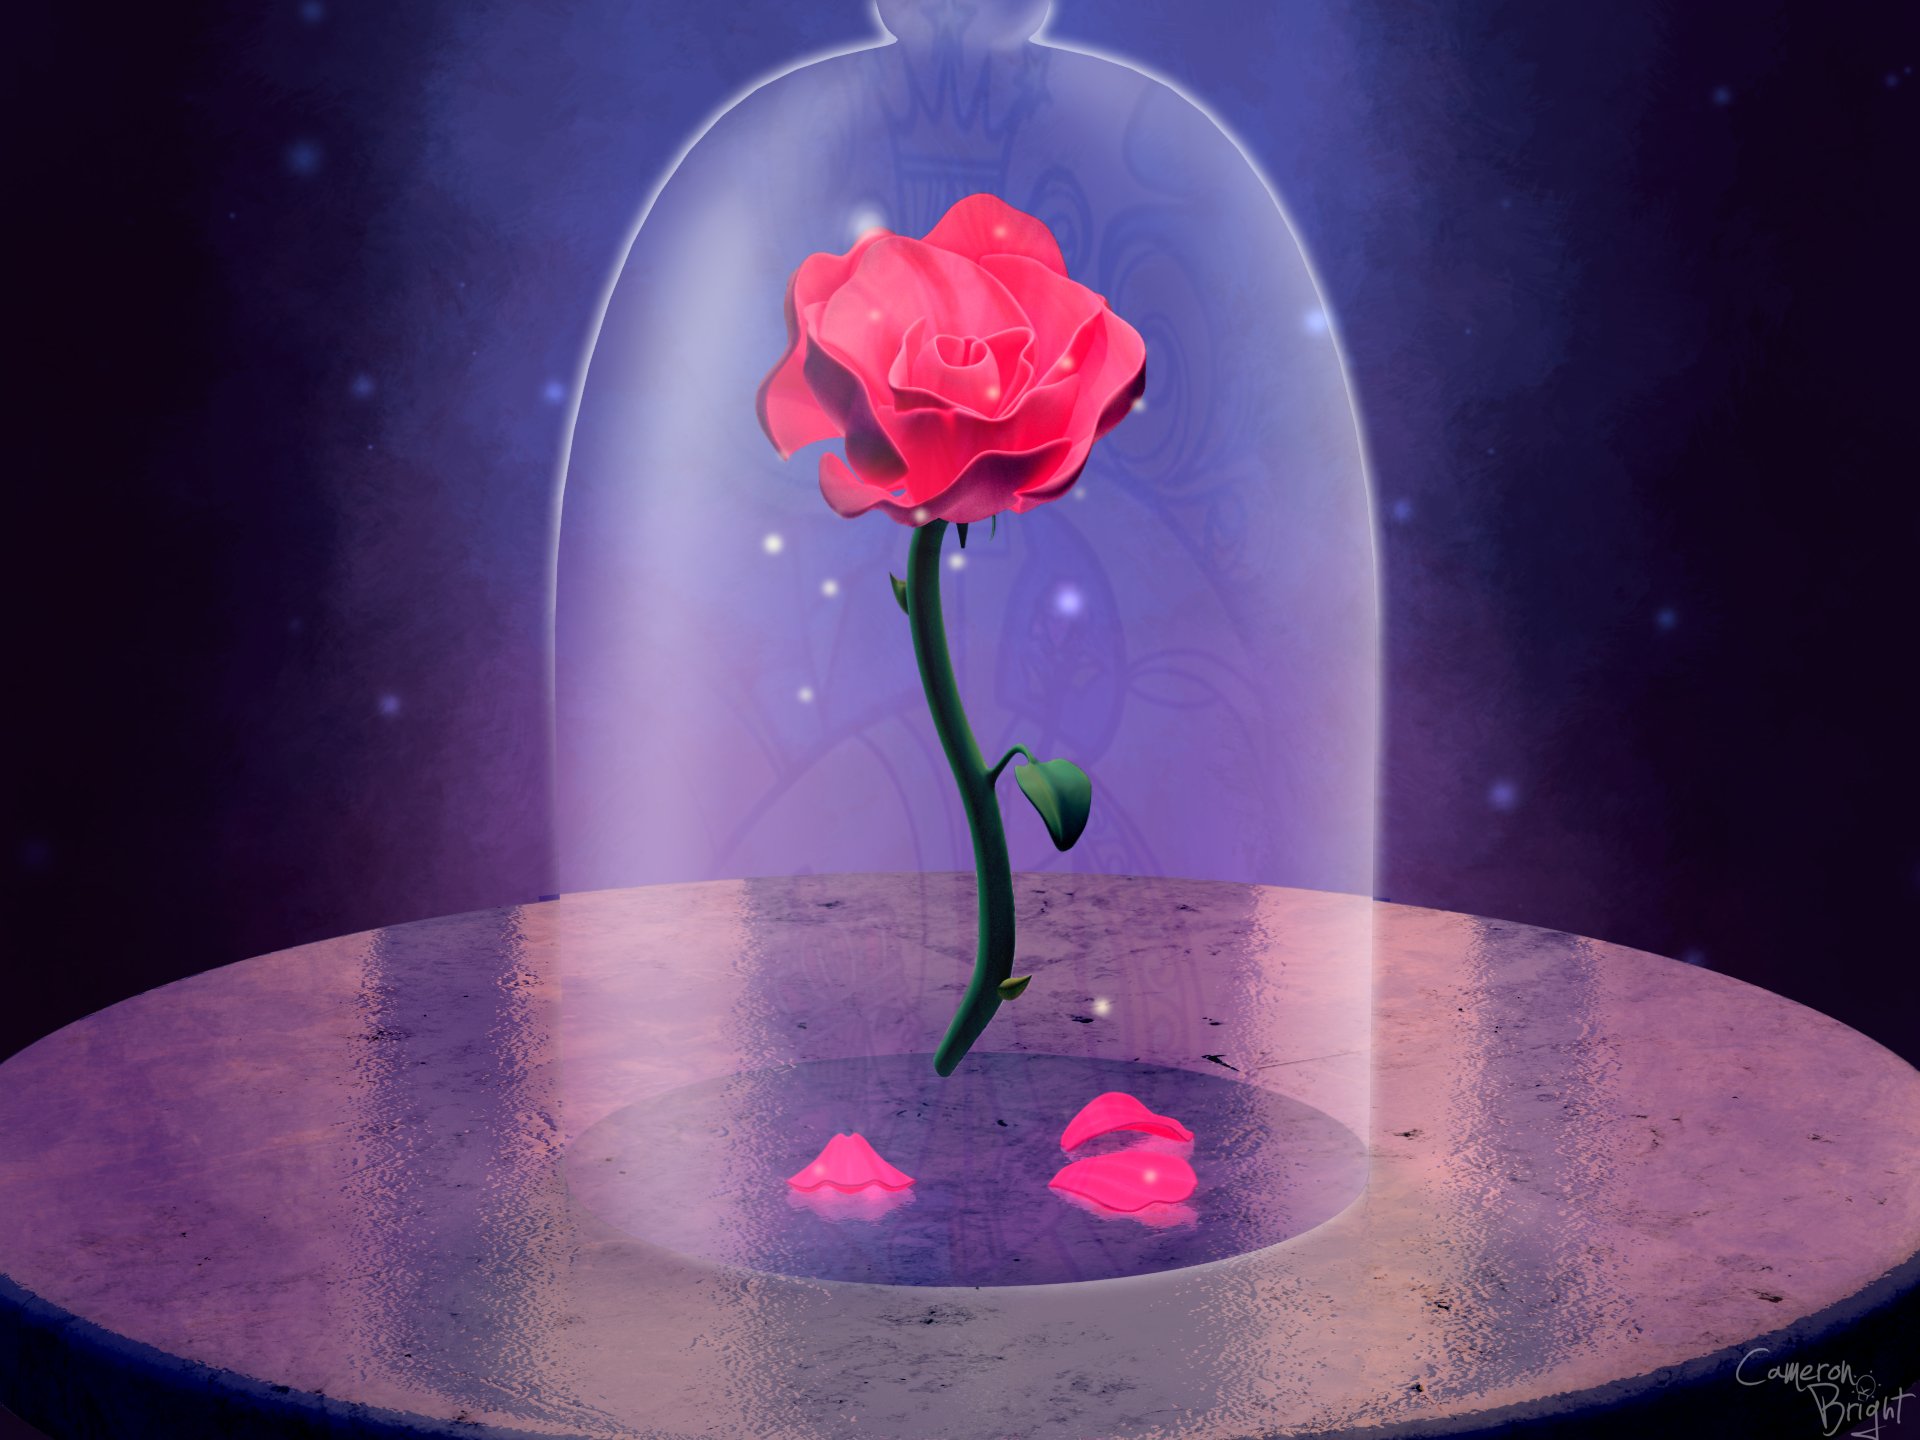 Beauty And The Beast Pink Rose - HD Wallpaper 